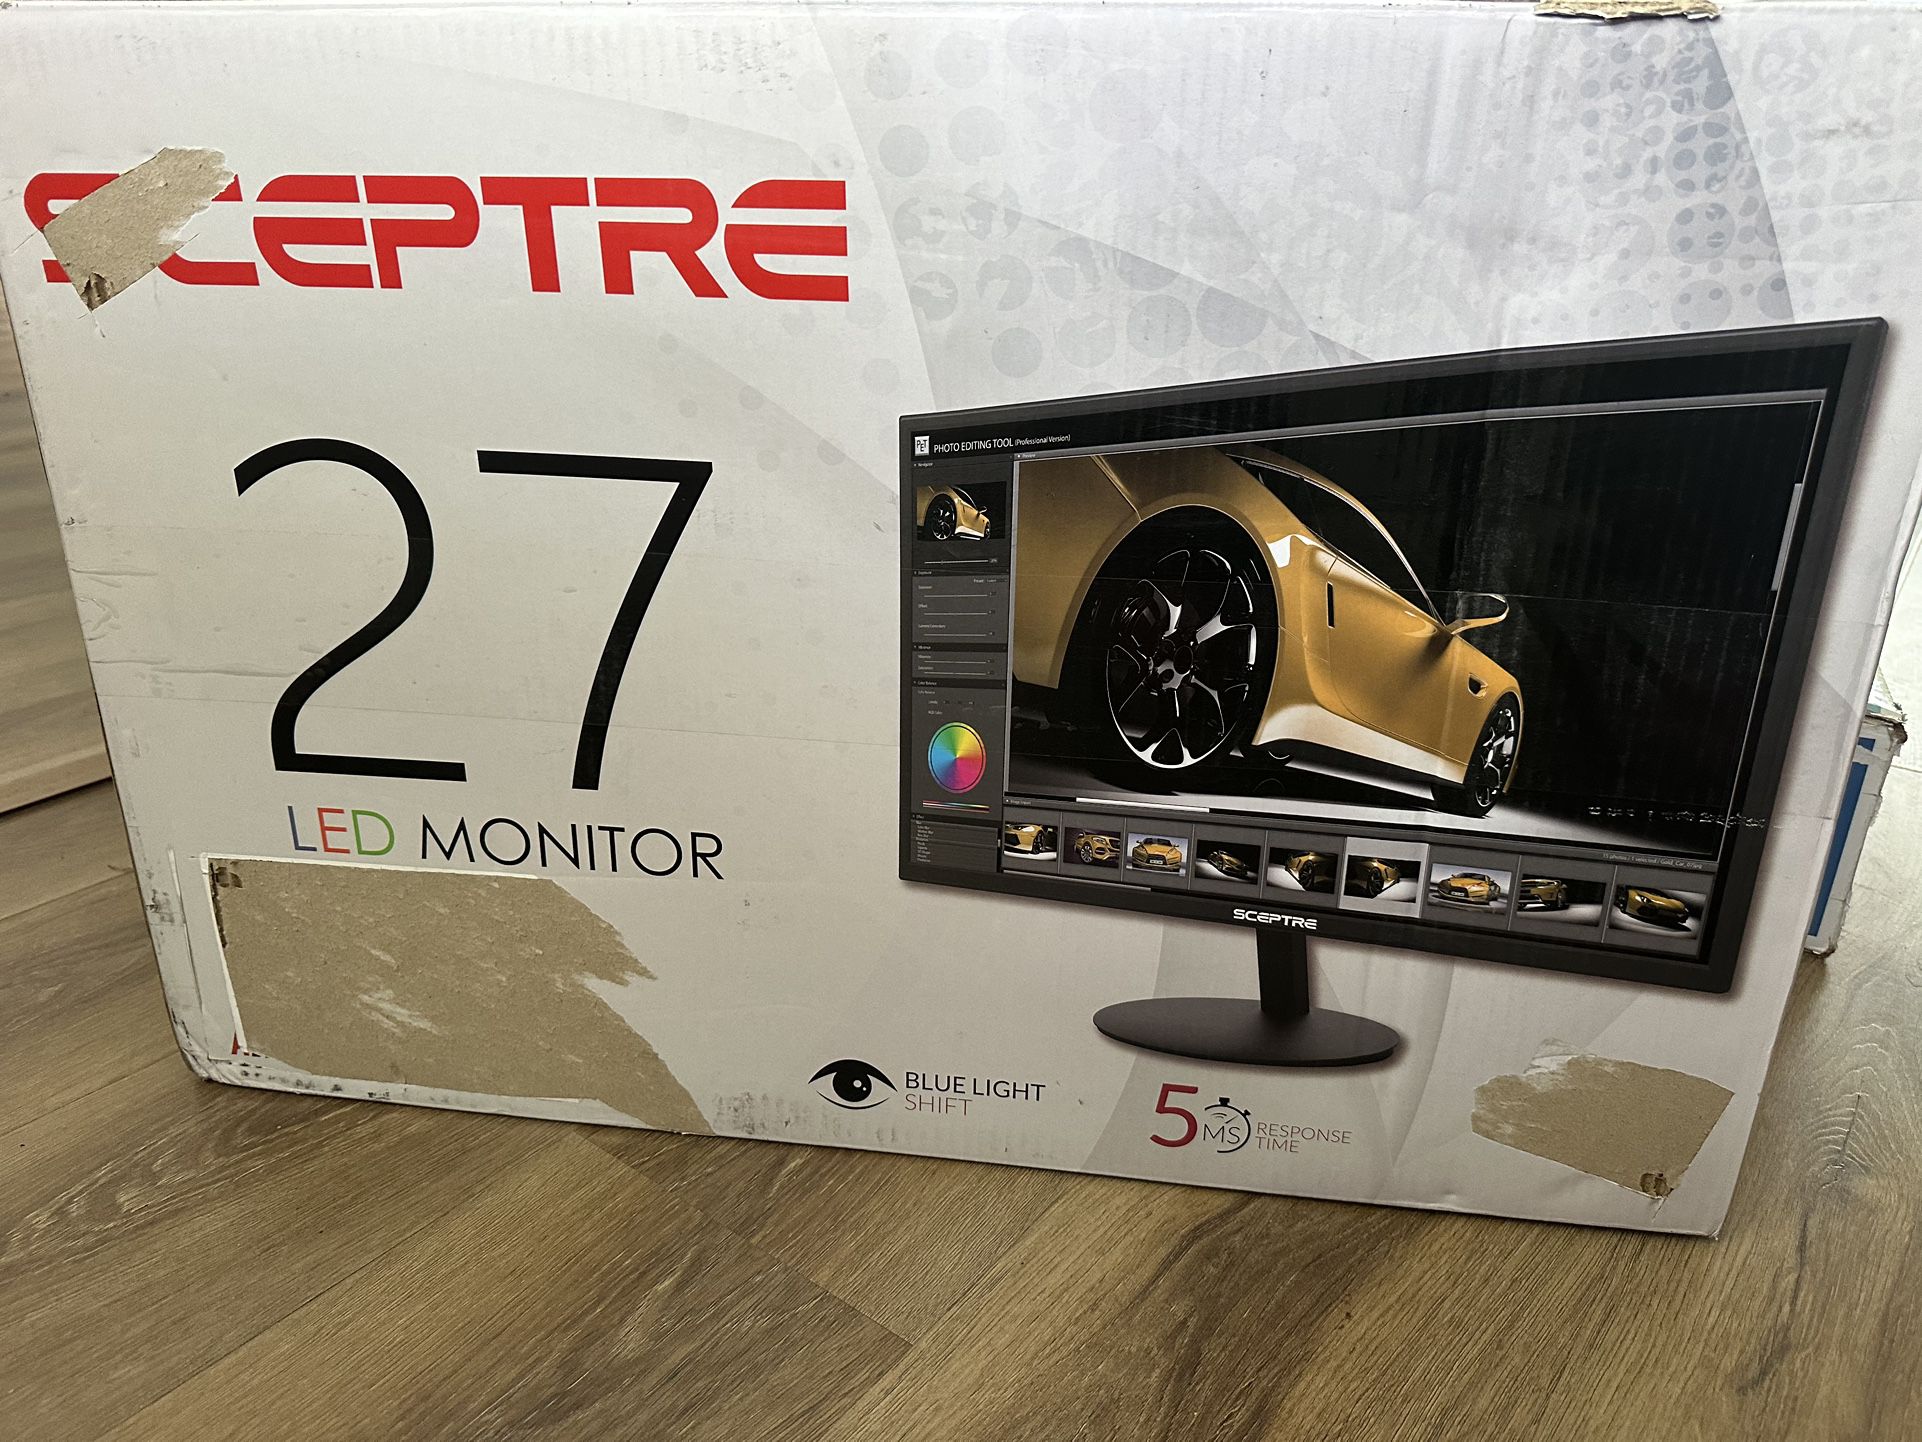 Spectre 27in LED Monitor